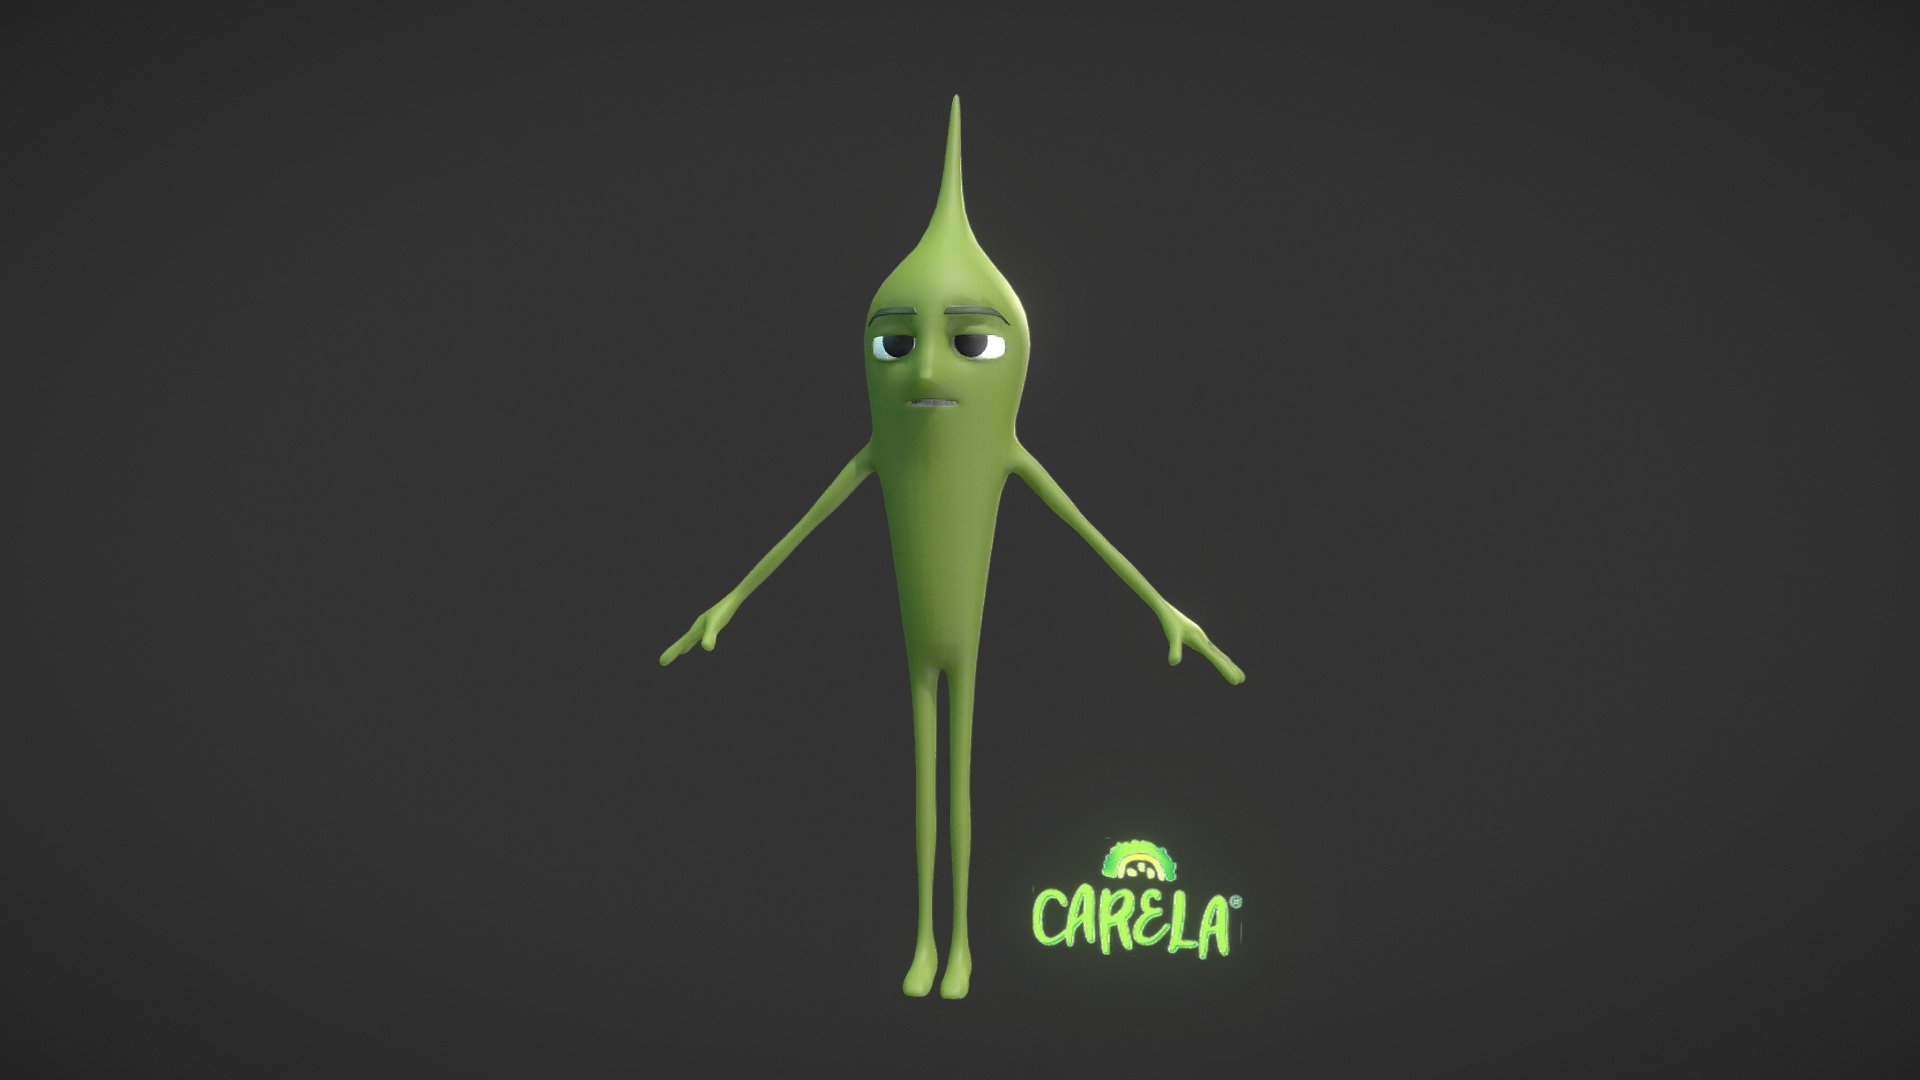 Bittermelon Guy for Carela Foods. 
This vegetable man is owned by Carela. 

I was responsible for modeling and UVs. The final render and look for him is on my website, so please feel free to check him out if you'd like to see it.

http://kangwjoann.wixsite.com/portfolio - Carela Foods Bittermelon Model - 3D model by Jo (@jokang) 3d model